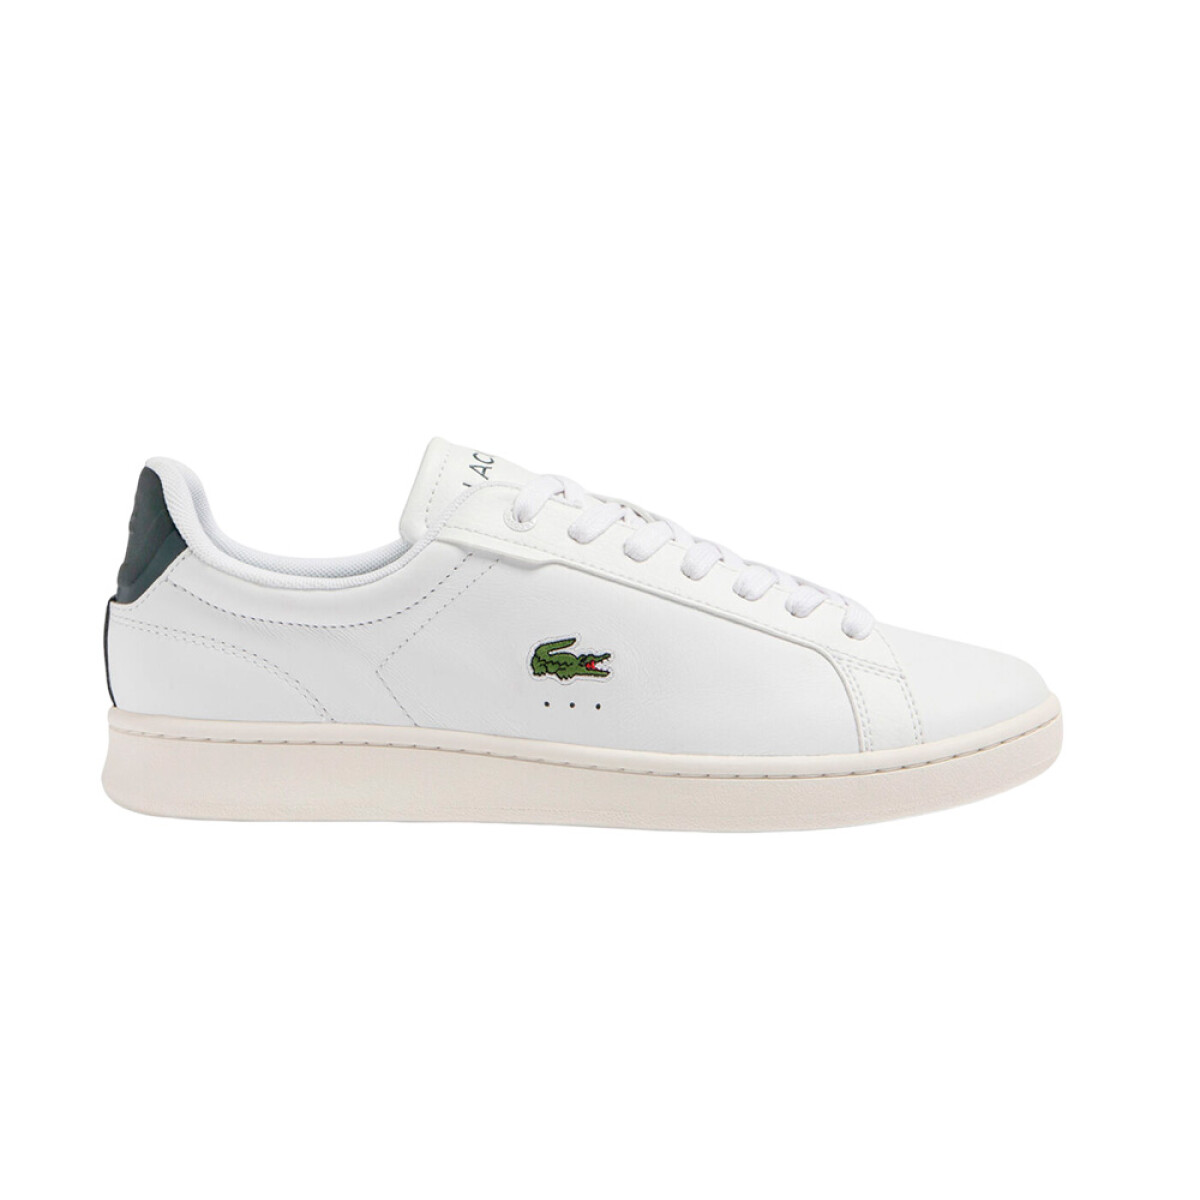 LACOSTE CARNABY PRO - 1R5 